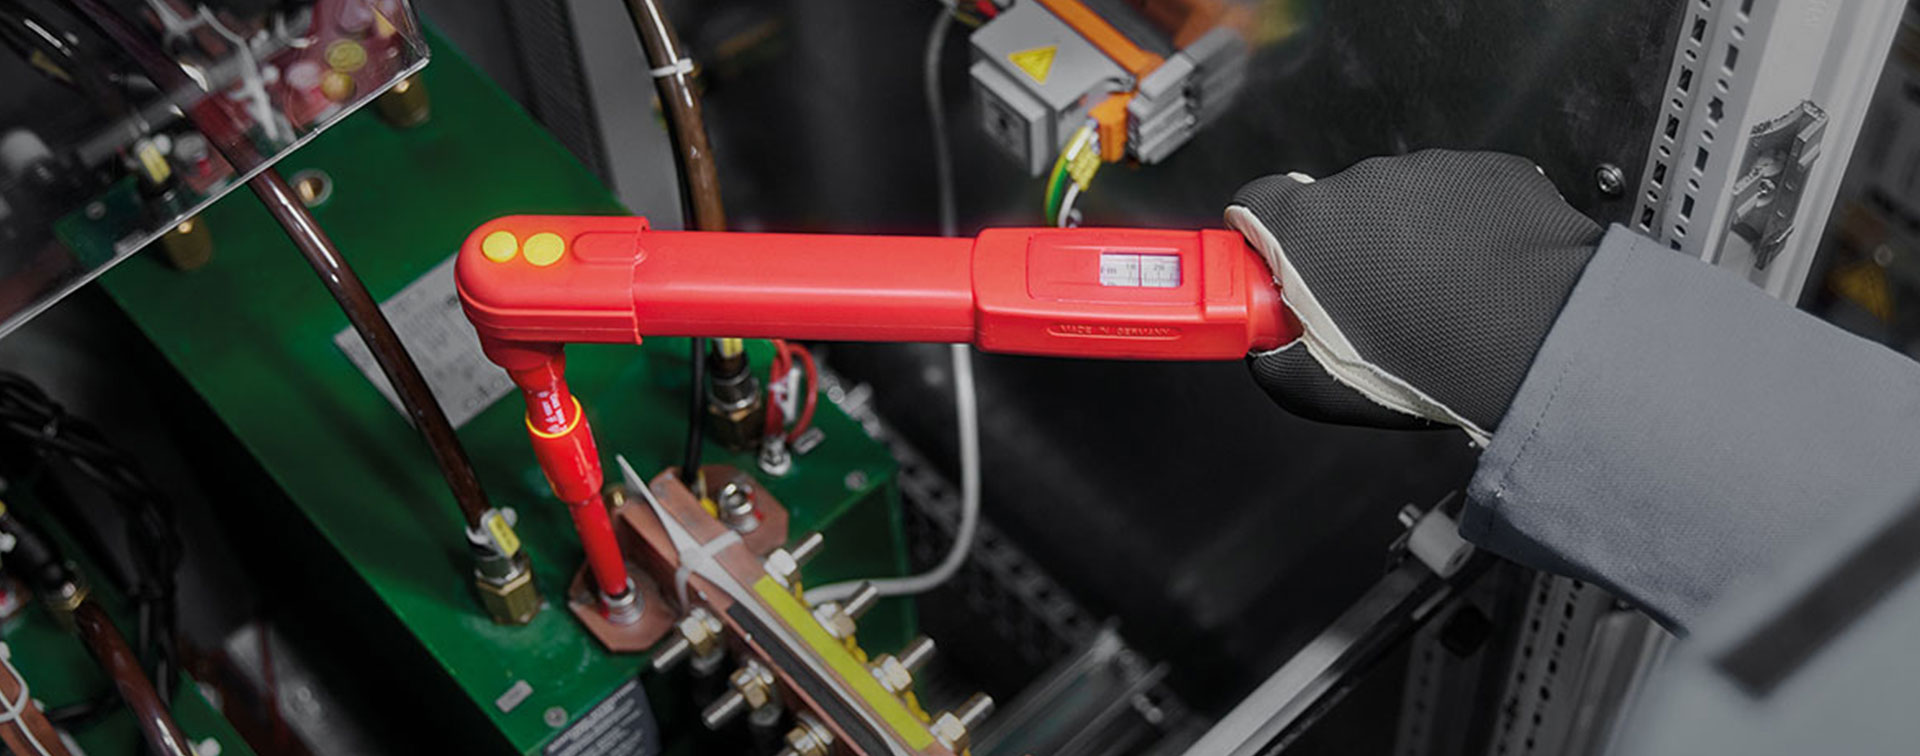 Voltage-tested torque wrench in a control cabinet